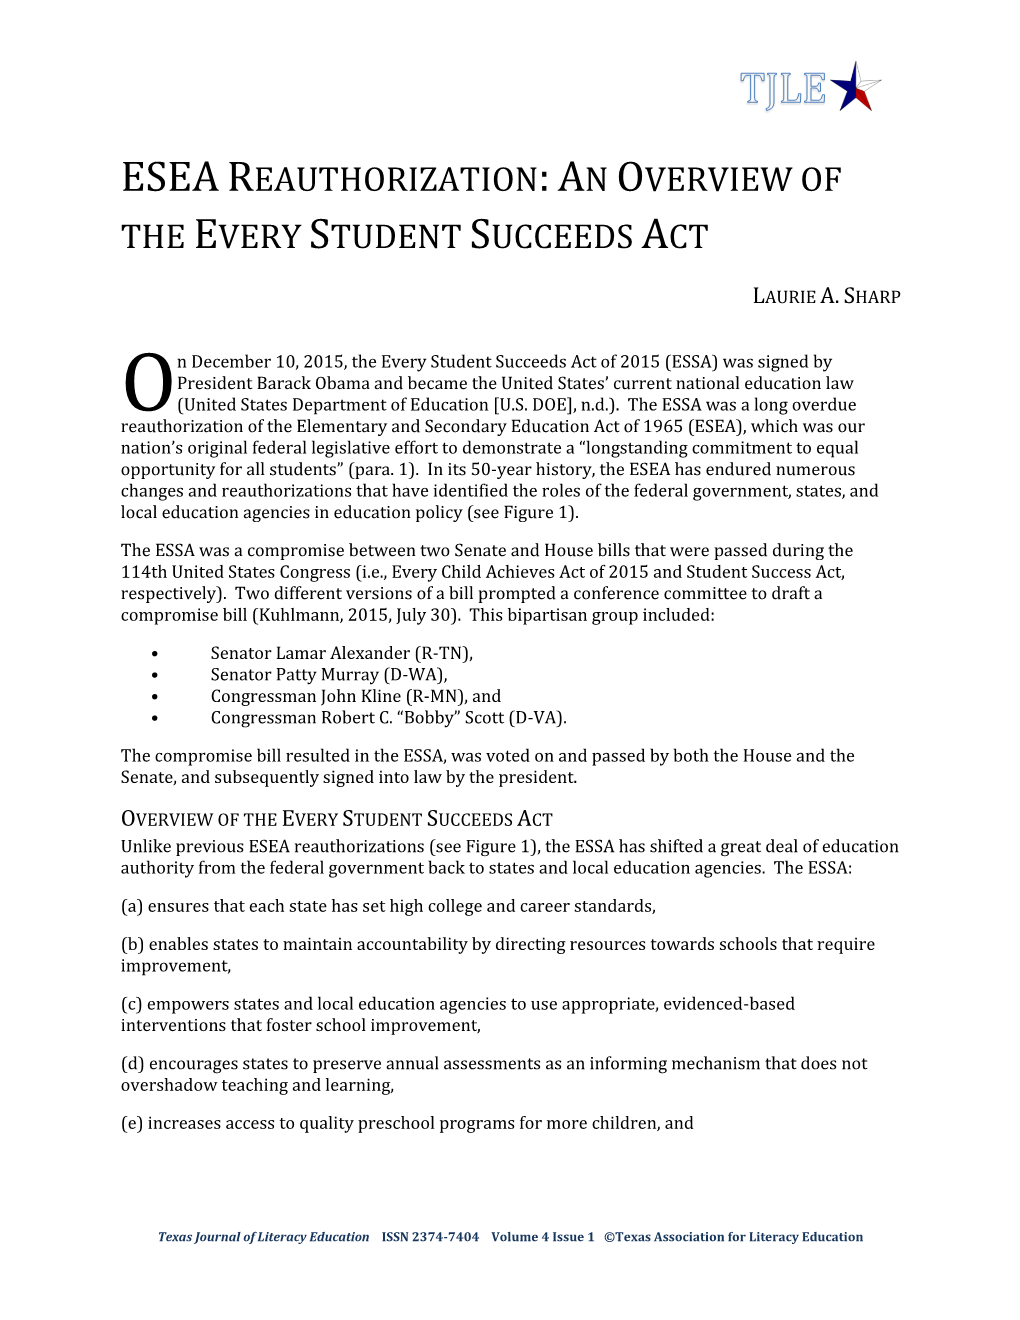 Eseareauthorization:An Overview of the Every